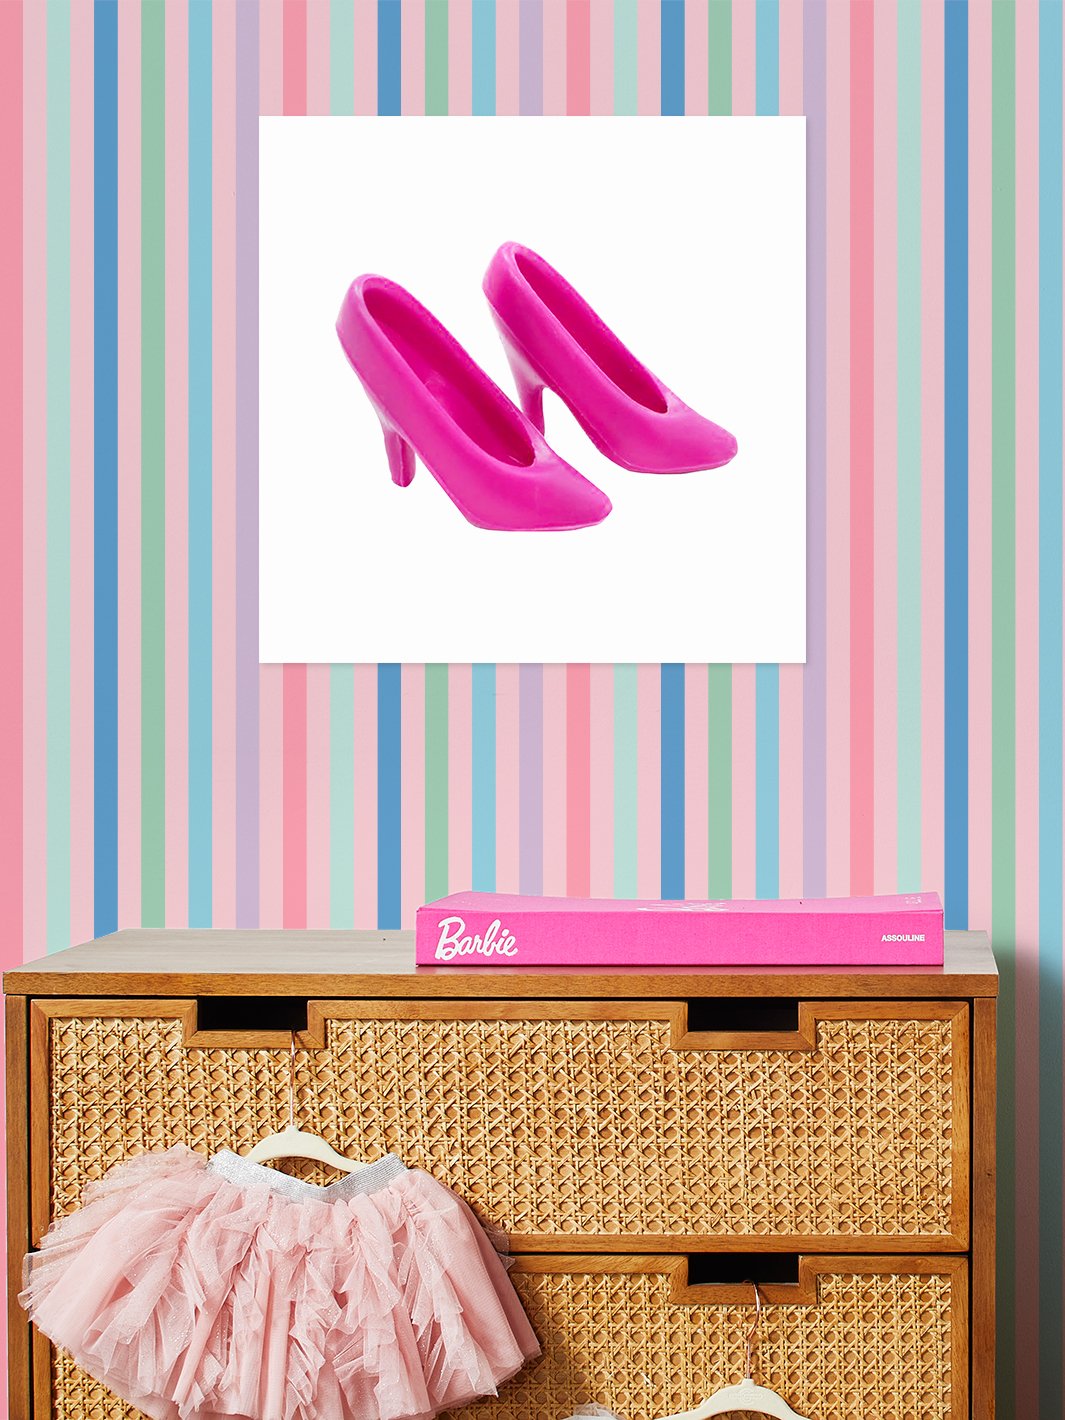 'Barbie™ Pink Pumps on Acrylic